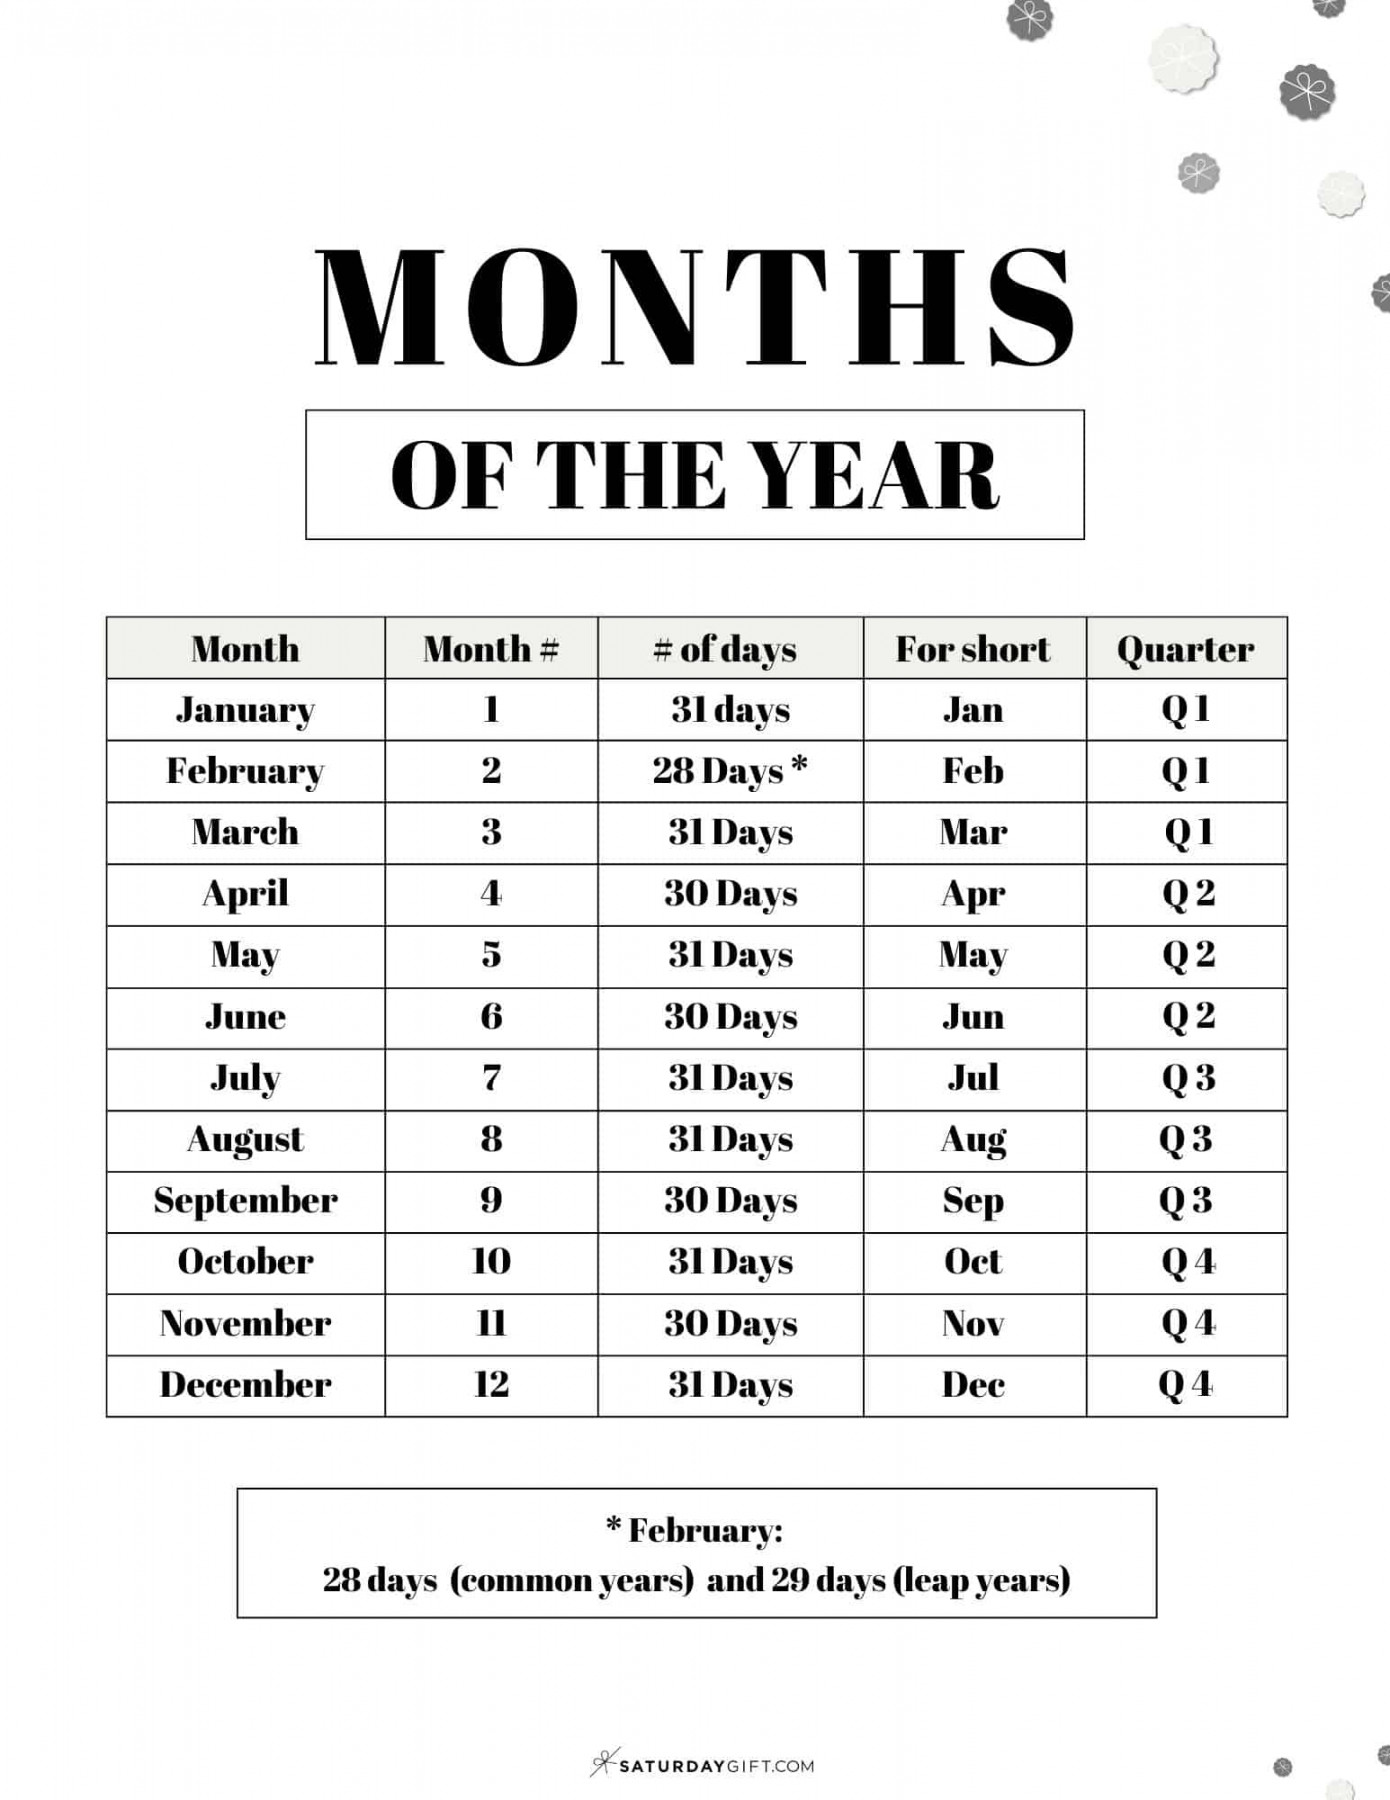 Months of the Year - List of Months in Order